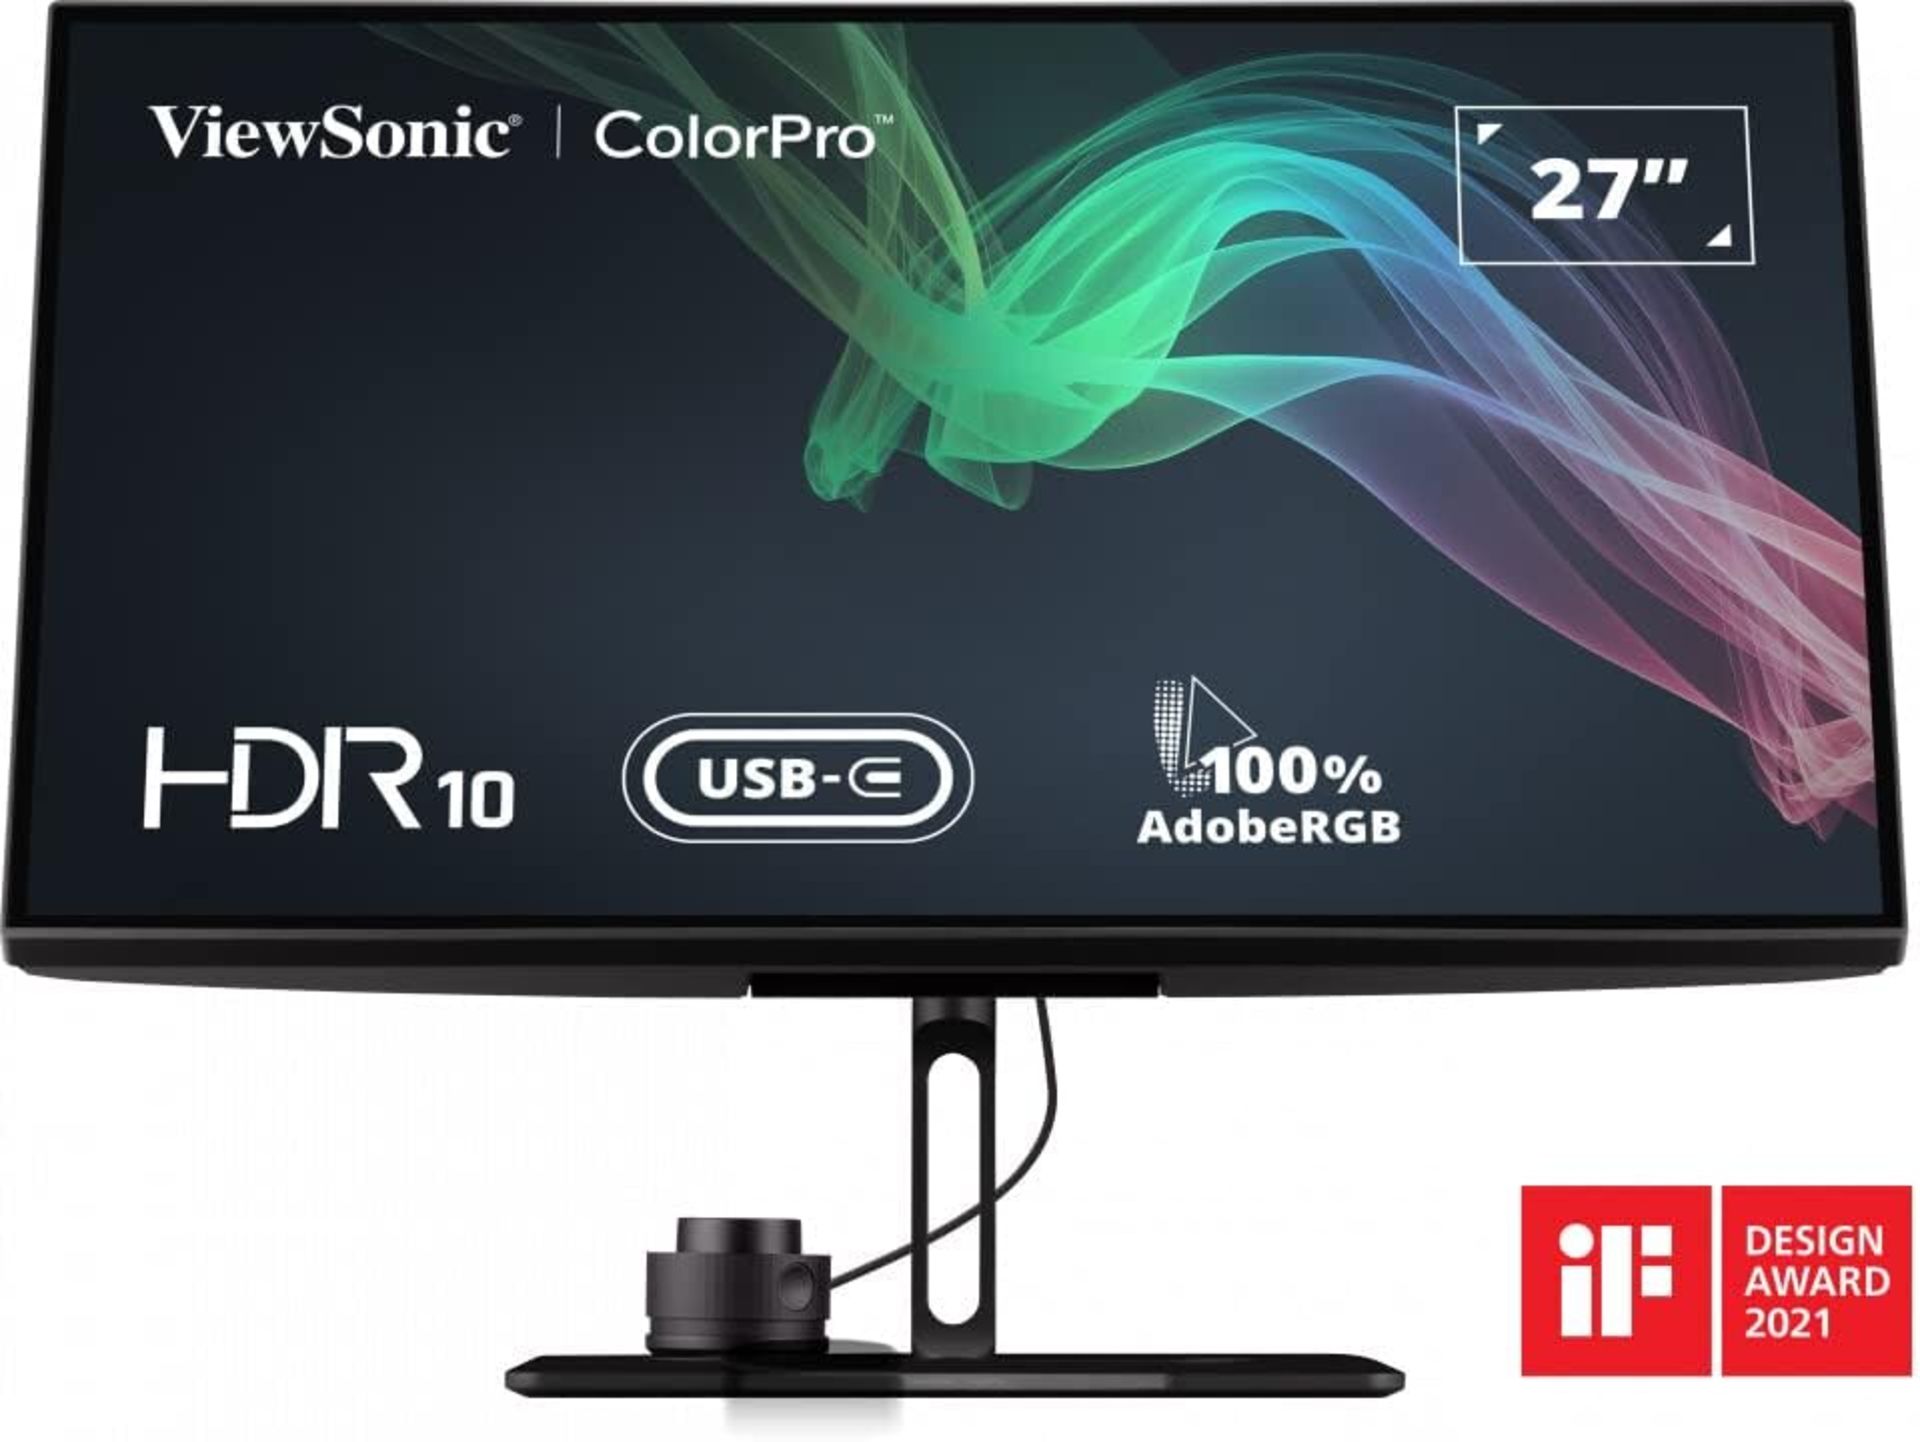 BRAND NEW FACTORY SEALED VIEWSONIC VP2786-4K ColorPro 27-inch IPS 4K UHD Monitor. RRP £1028. (PCK4). - Image 6 of 7